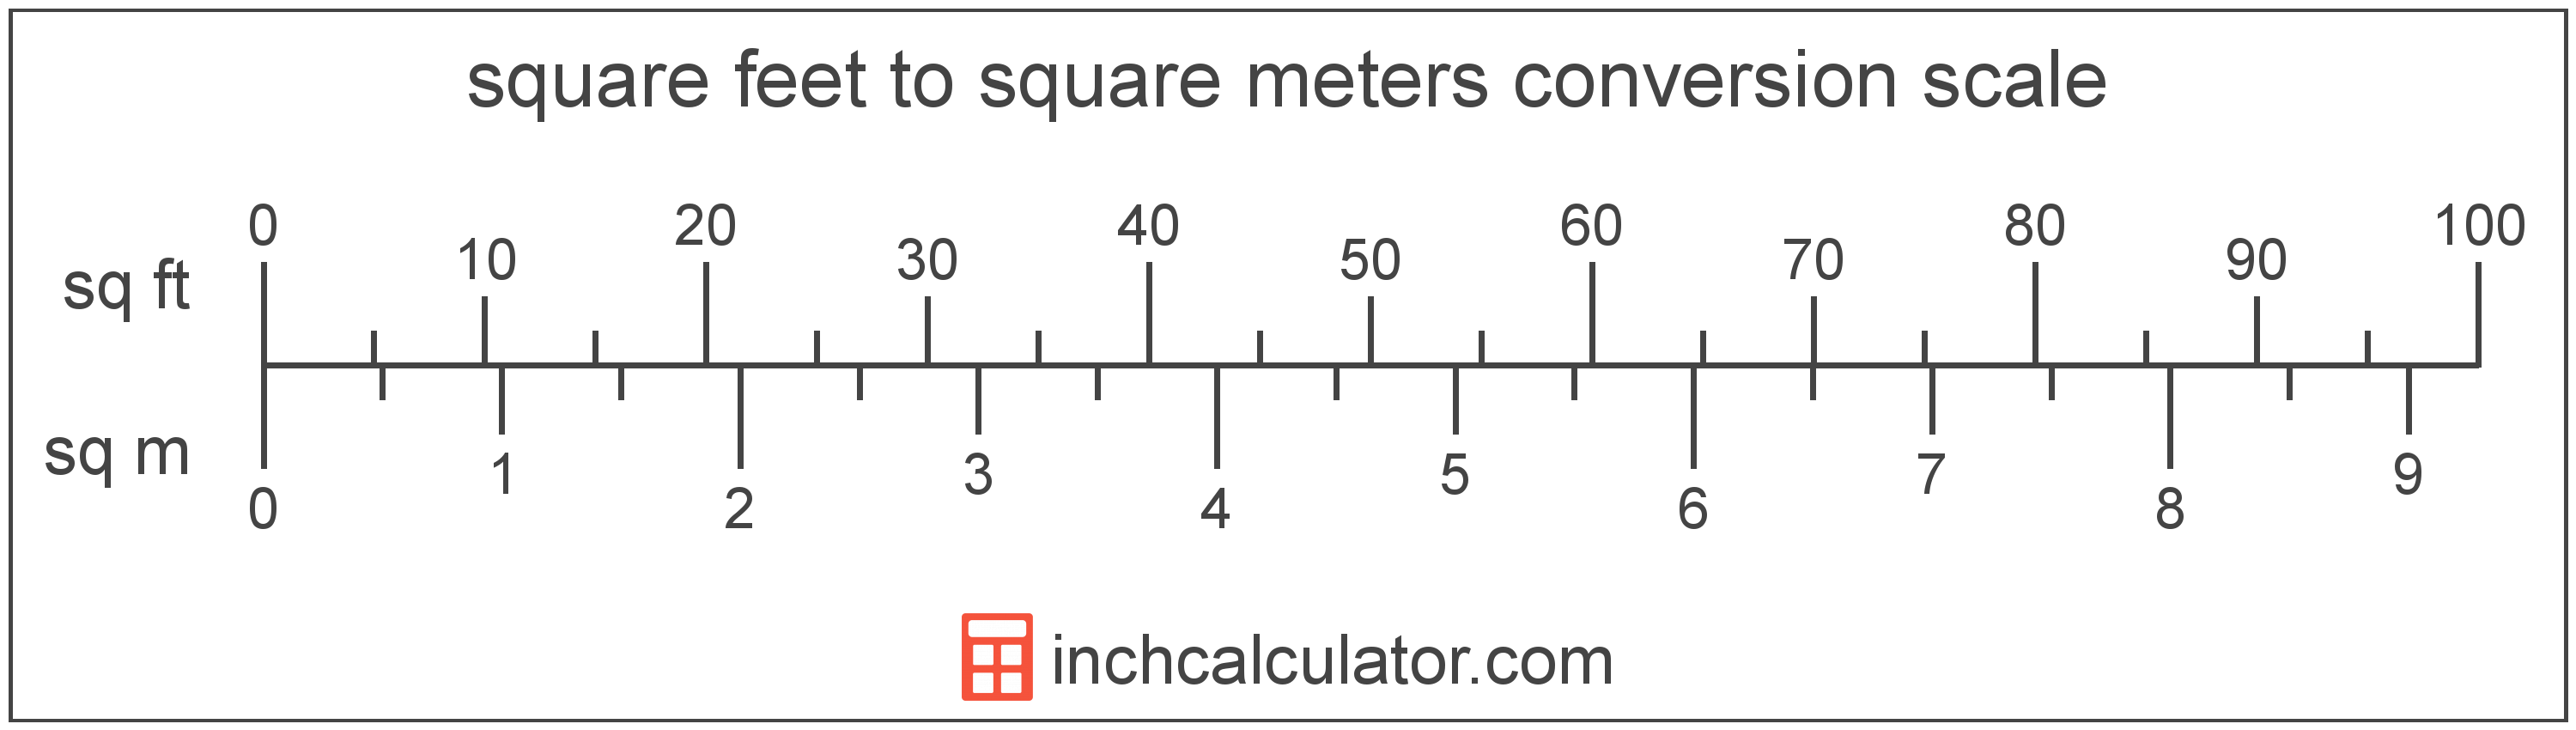 square meters to square feet